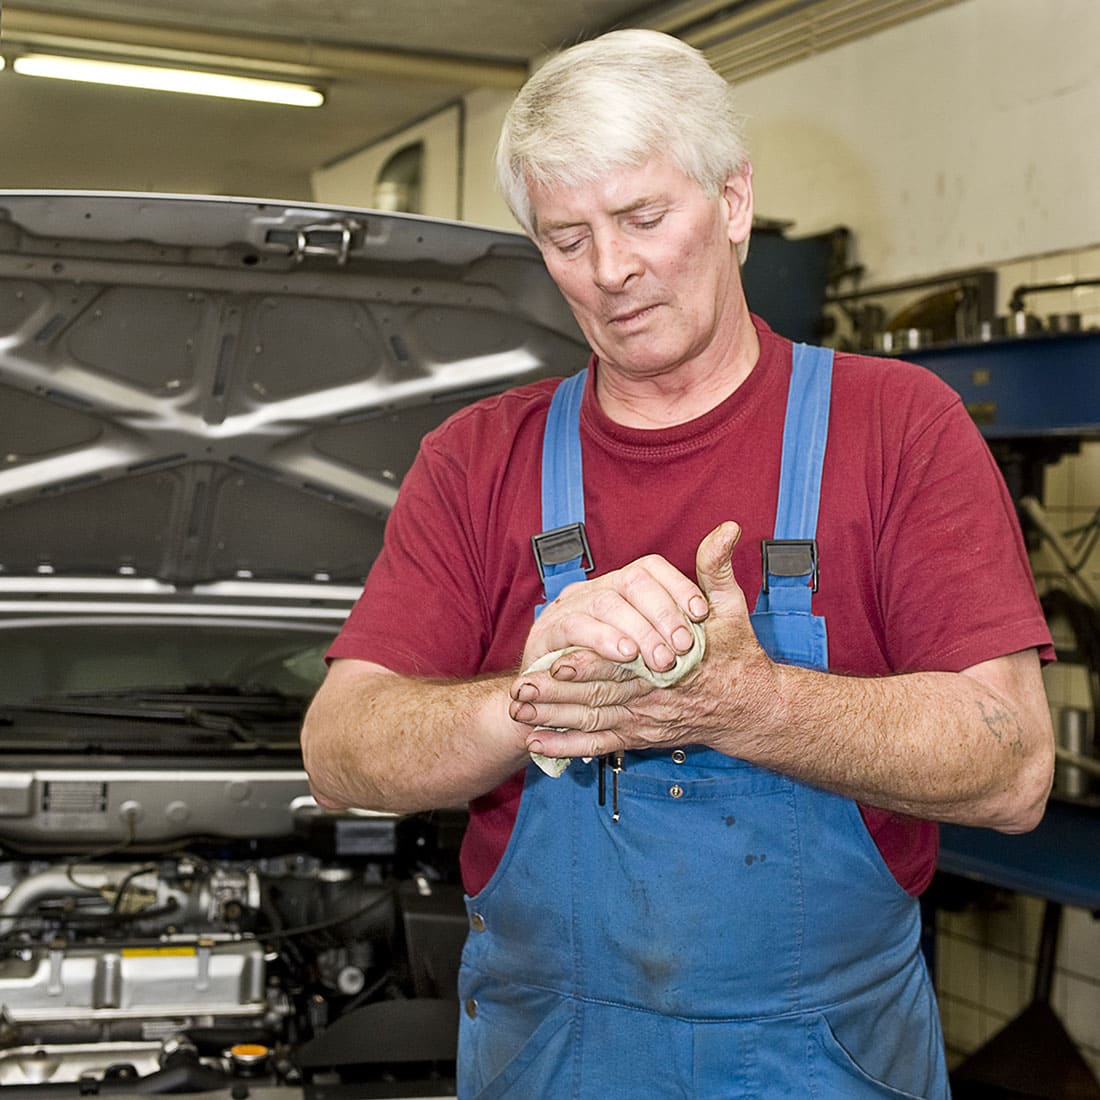 A motor mechanic cleaning his greasy hands after servicing a car.